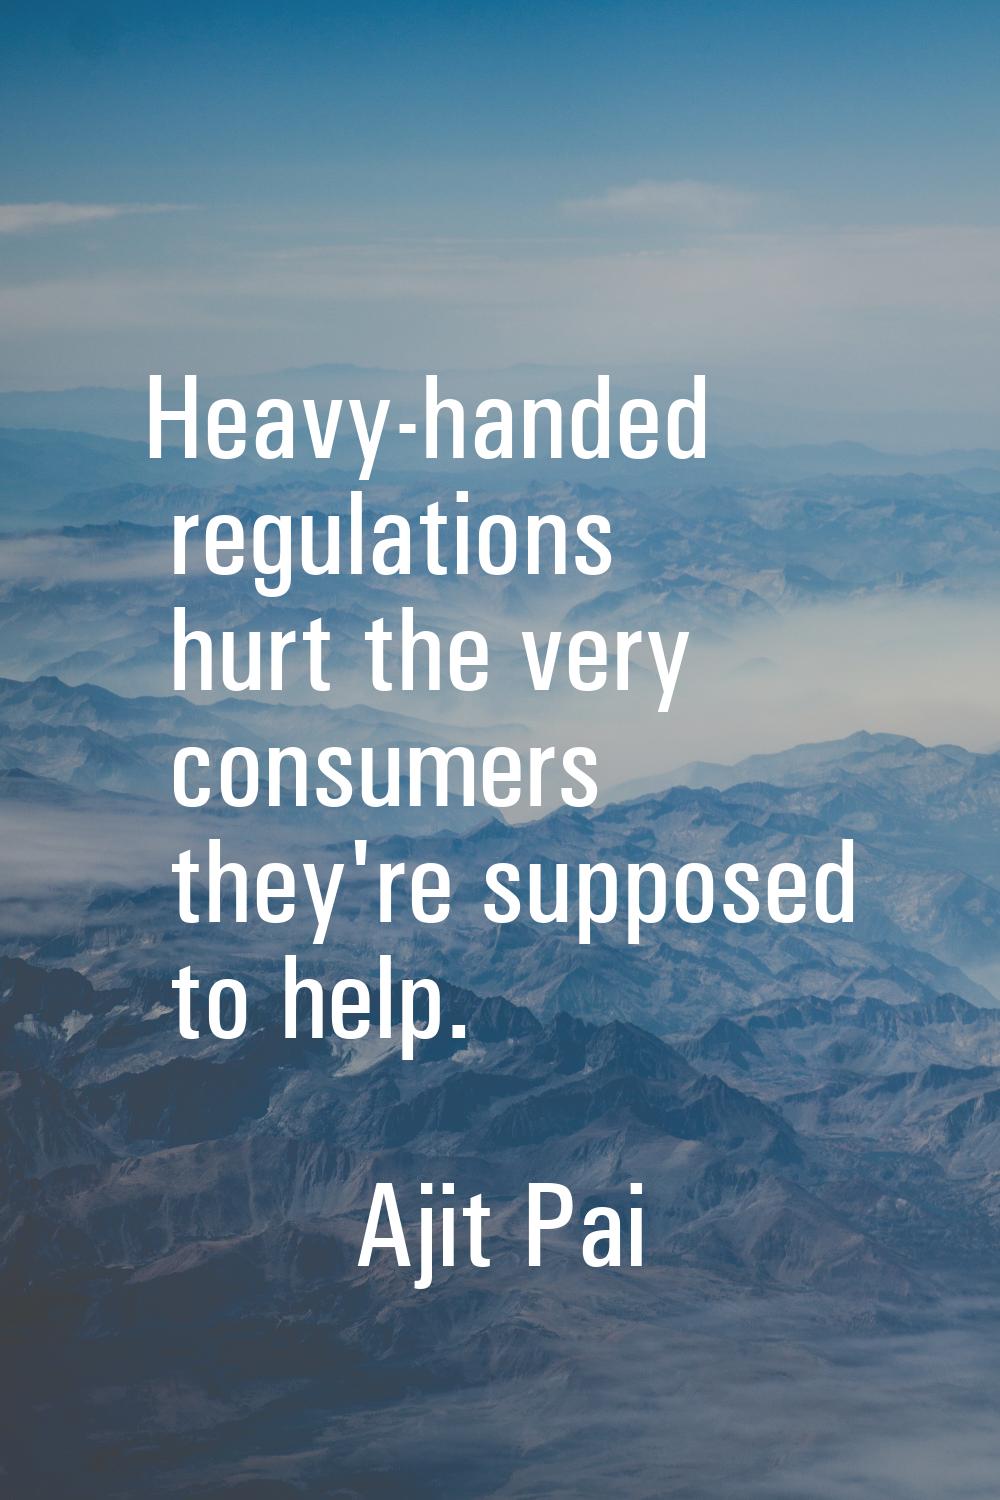 Heavy-handed regulations hurt the very consumers they're supposed to help.